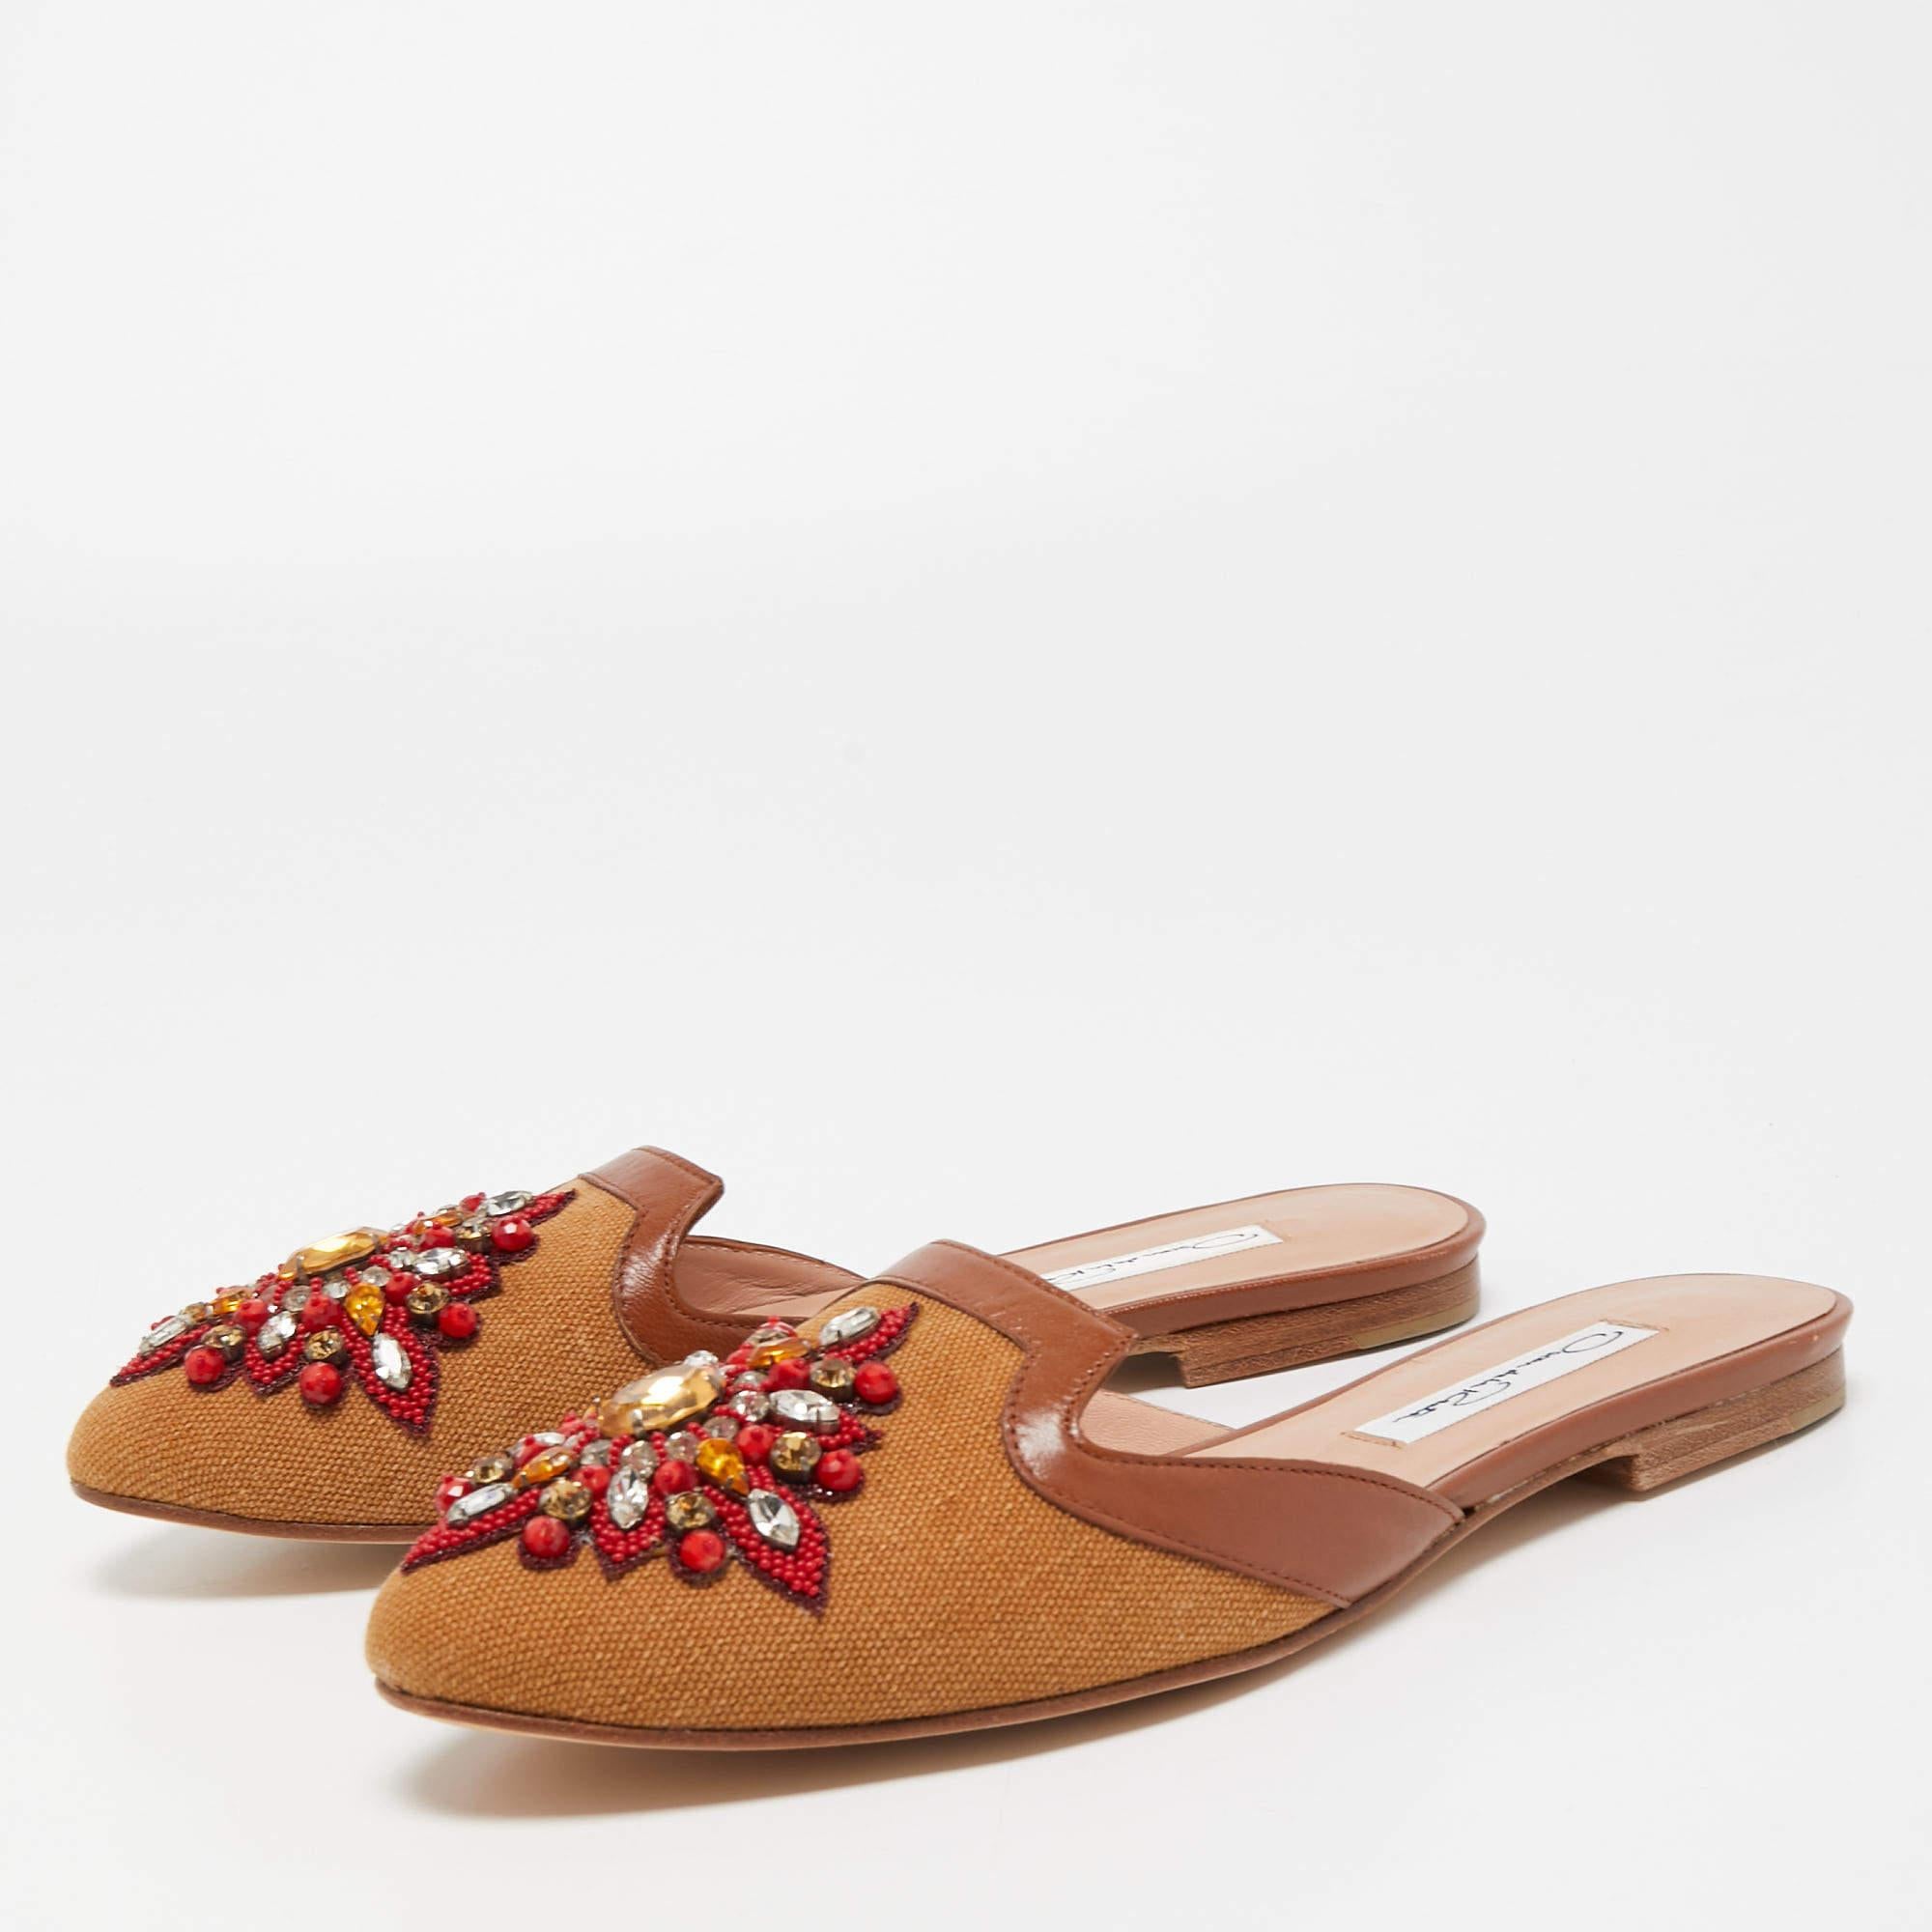 Oscar de la Renta Brown Canvas and Leather Spanish Embellished Flat Mules Size 3 In New Condition For Sale In Dubai, Al Qouz 2